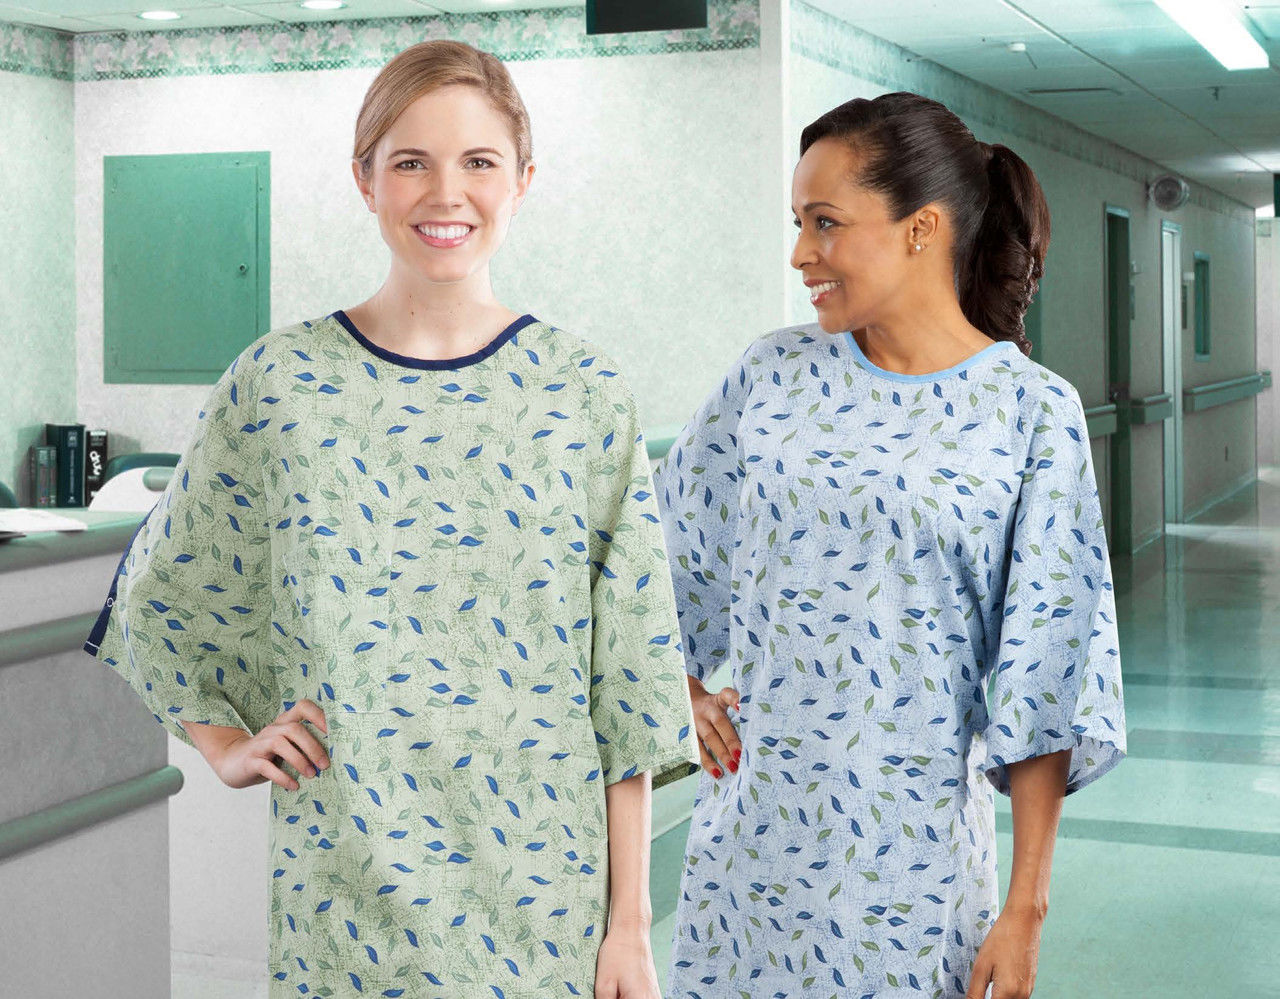 Are the American Dawn (ADI) patient gowns made from polyester?